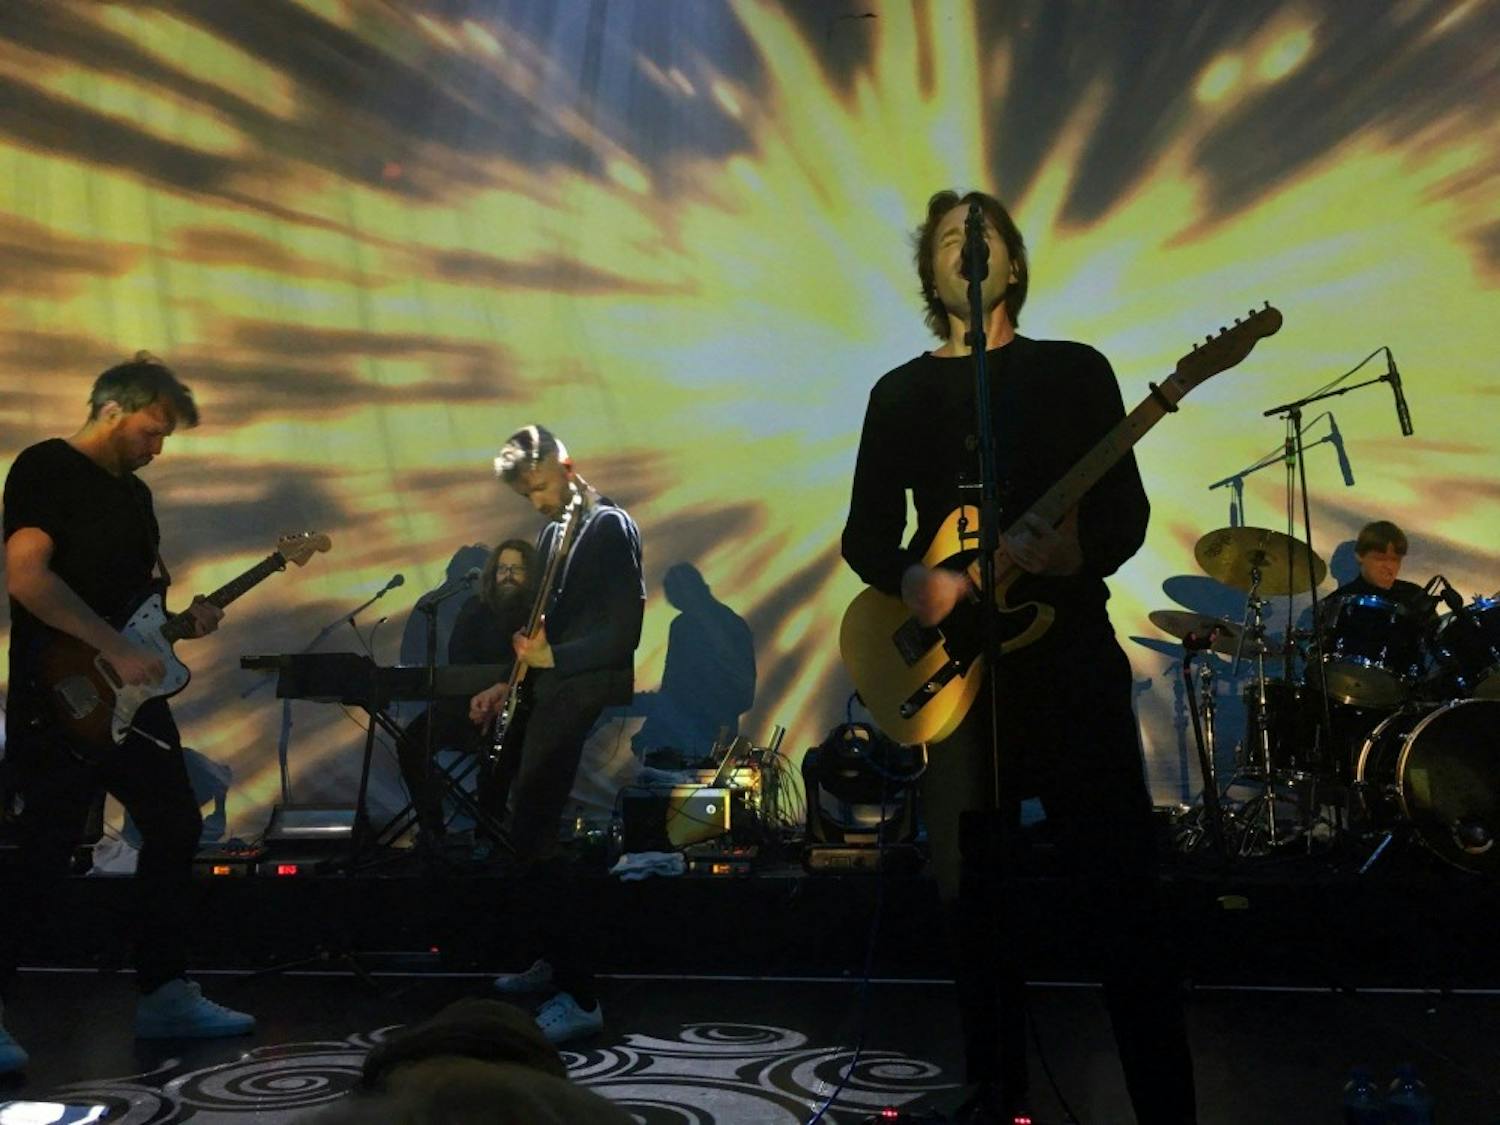 Mew performing at the Paradiso in Amsterdam. From right:&nbsp;Utke Graae Jørgensen, Bjerre, Wohlert. Supporting musicians Nick Watts (keyboards) and Mags Wegner (guitar) are also pictured. Photo taken by @Earthling69.